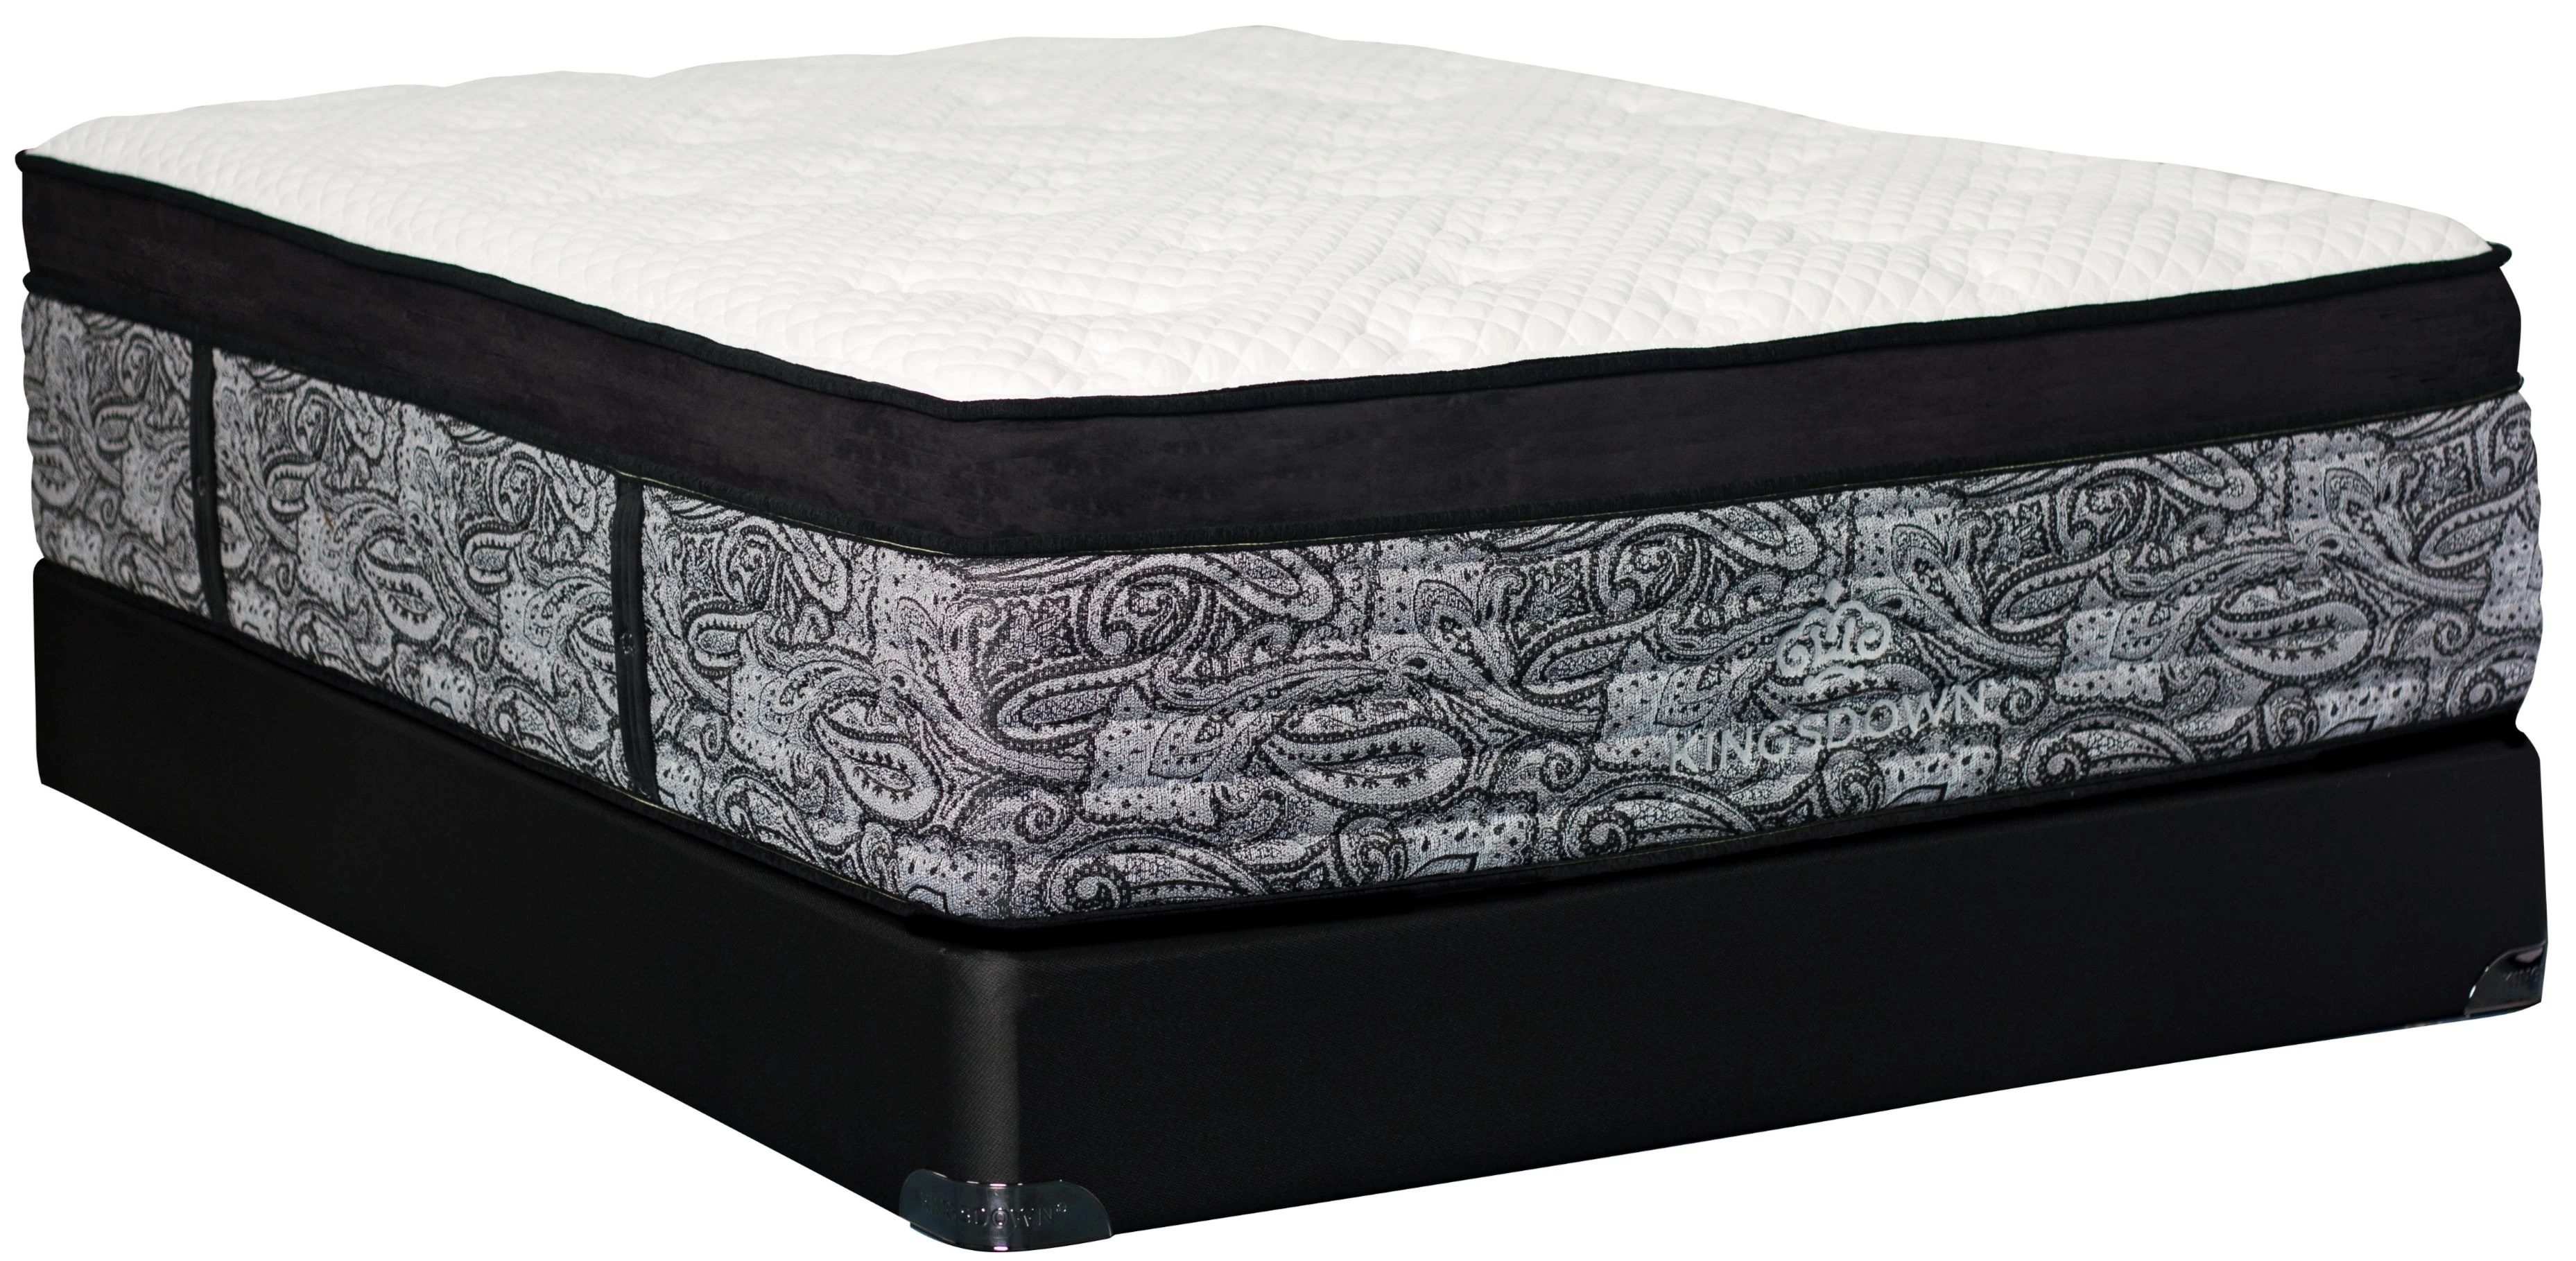 Side view of Kingsdown Crown Imperial Marquis queen-size best Euro top mattress 